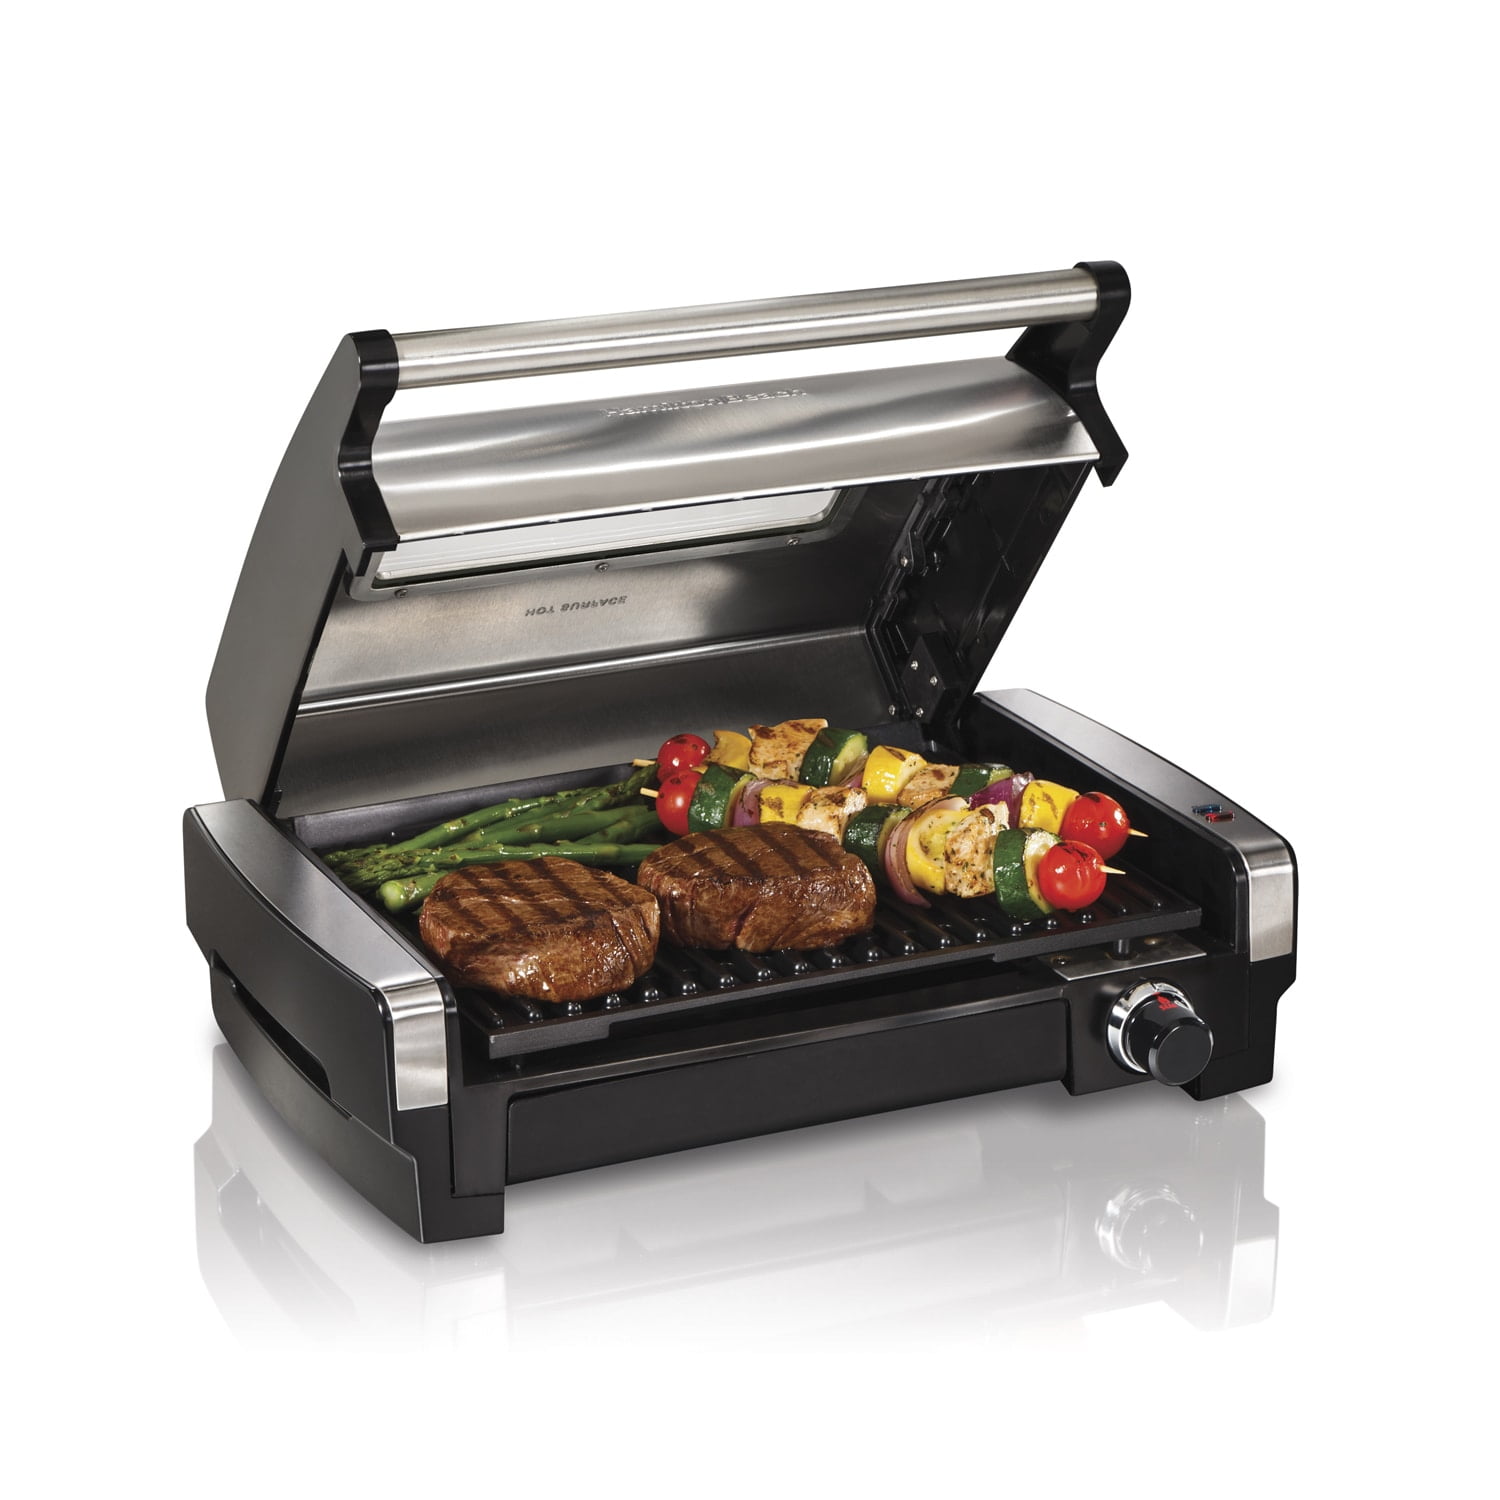 Hamilton Beach Electric Indoor Searing Grill with Viewing Window, Removable Easy to Clean Nonstick Plate, 6-Serving, Extra-Large Drip Tray, Stainless Steel, 25361 - image 4 of 5